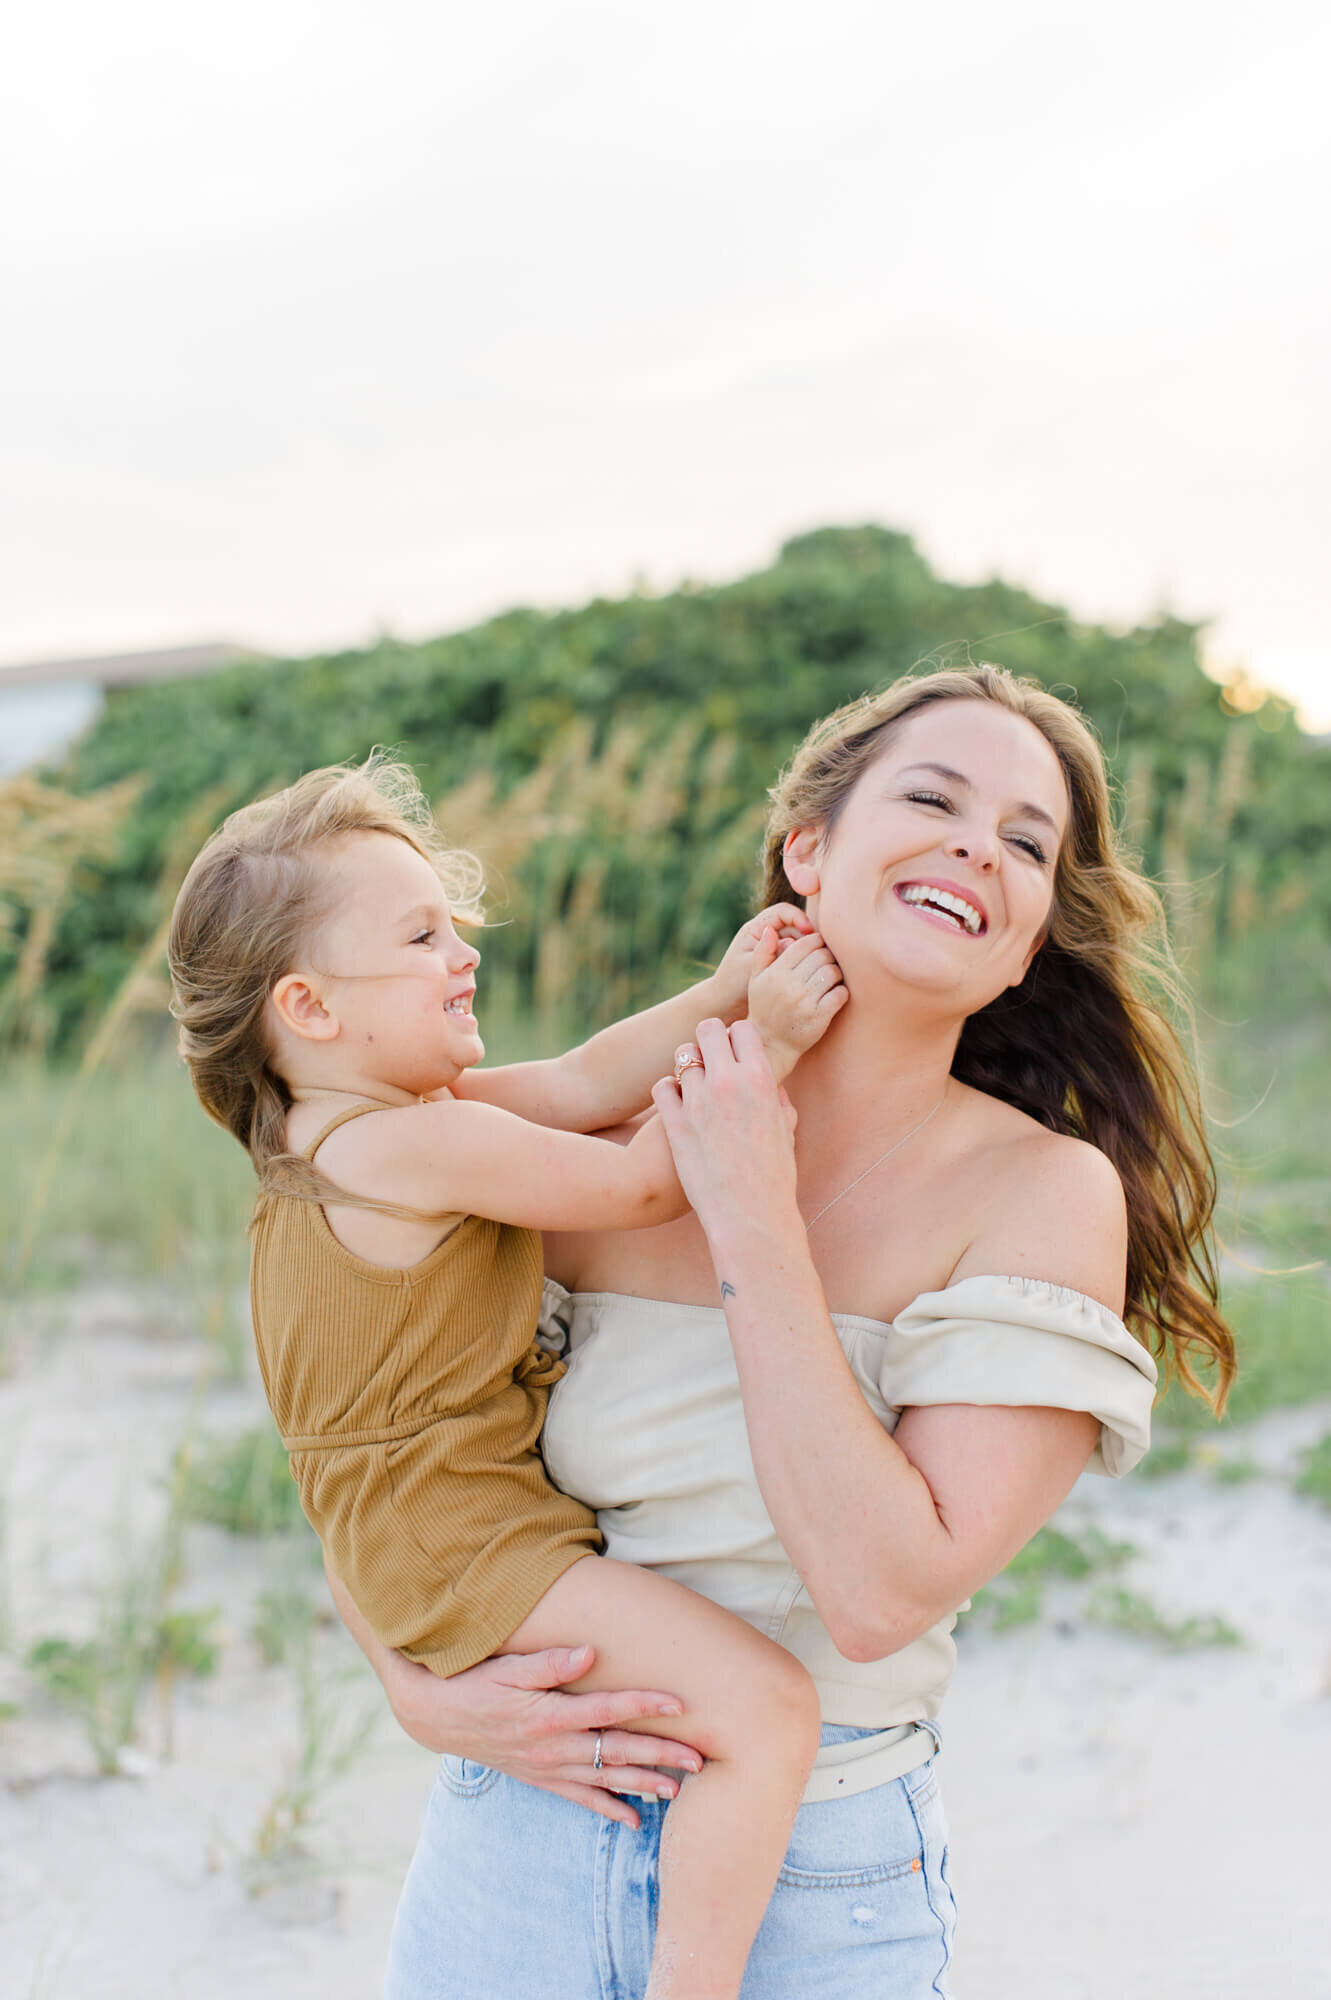 Mom holding daughter while she tickles her mom during their family beach photo session during golden hour